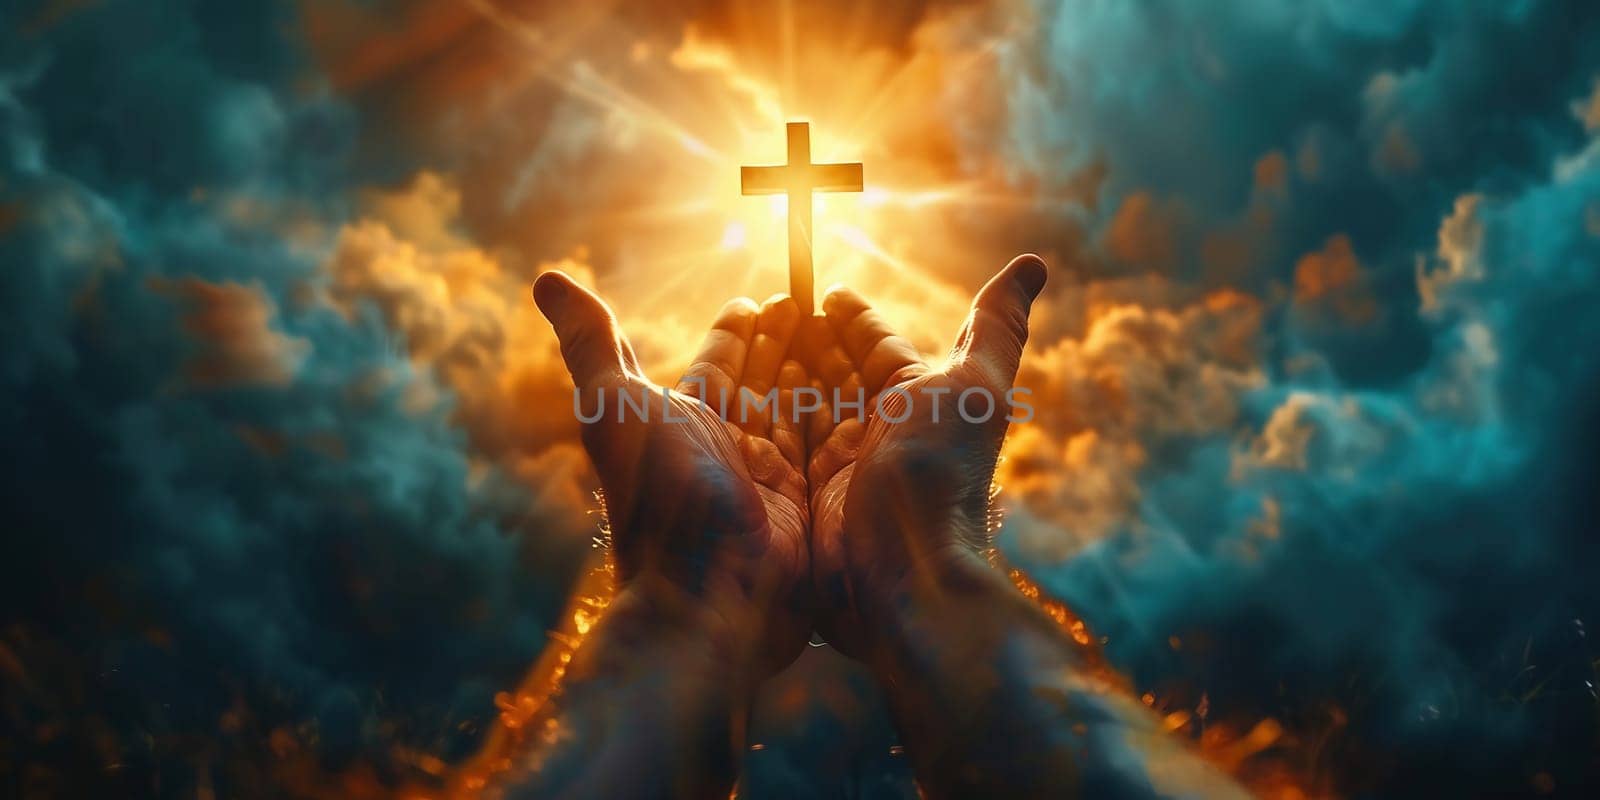 Hands together praying in bright sky. High quality photo